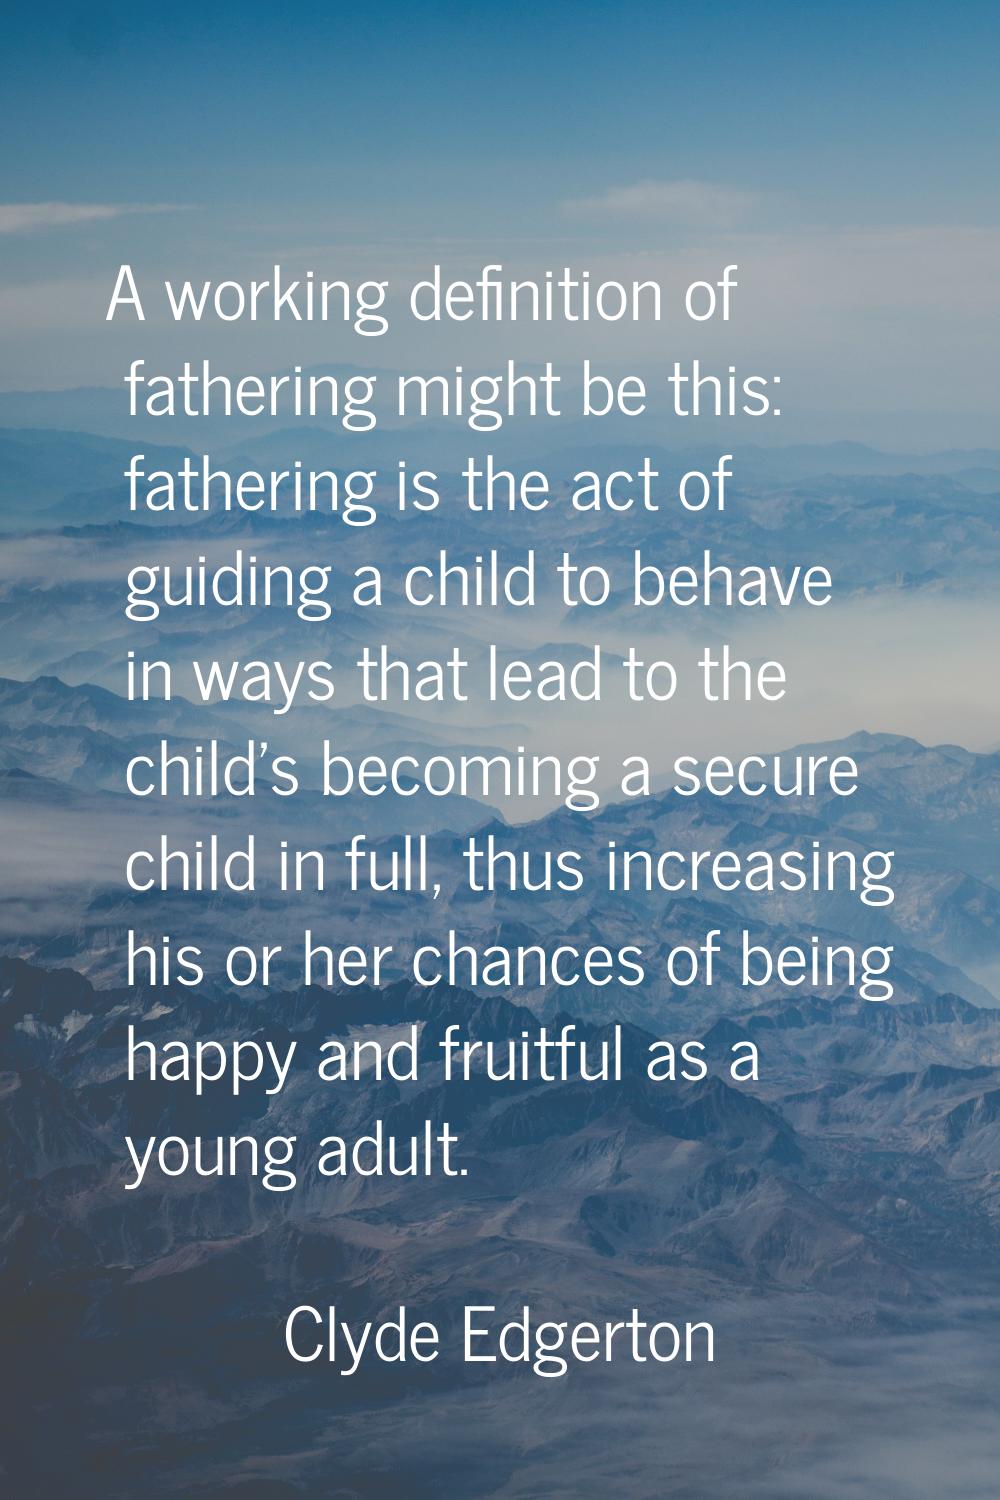 A working definition of fathering might be this: fathering is the act of guiding a child to behave 